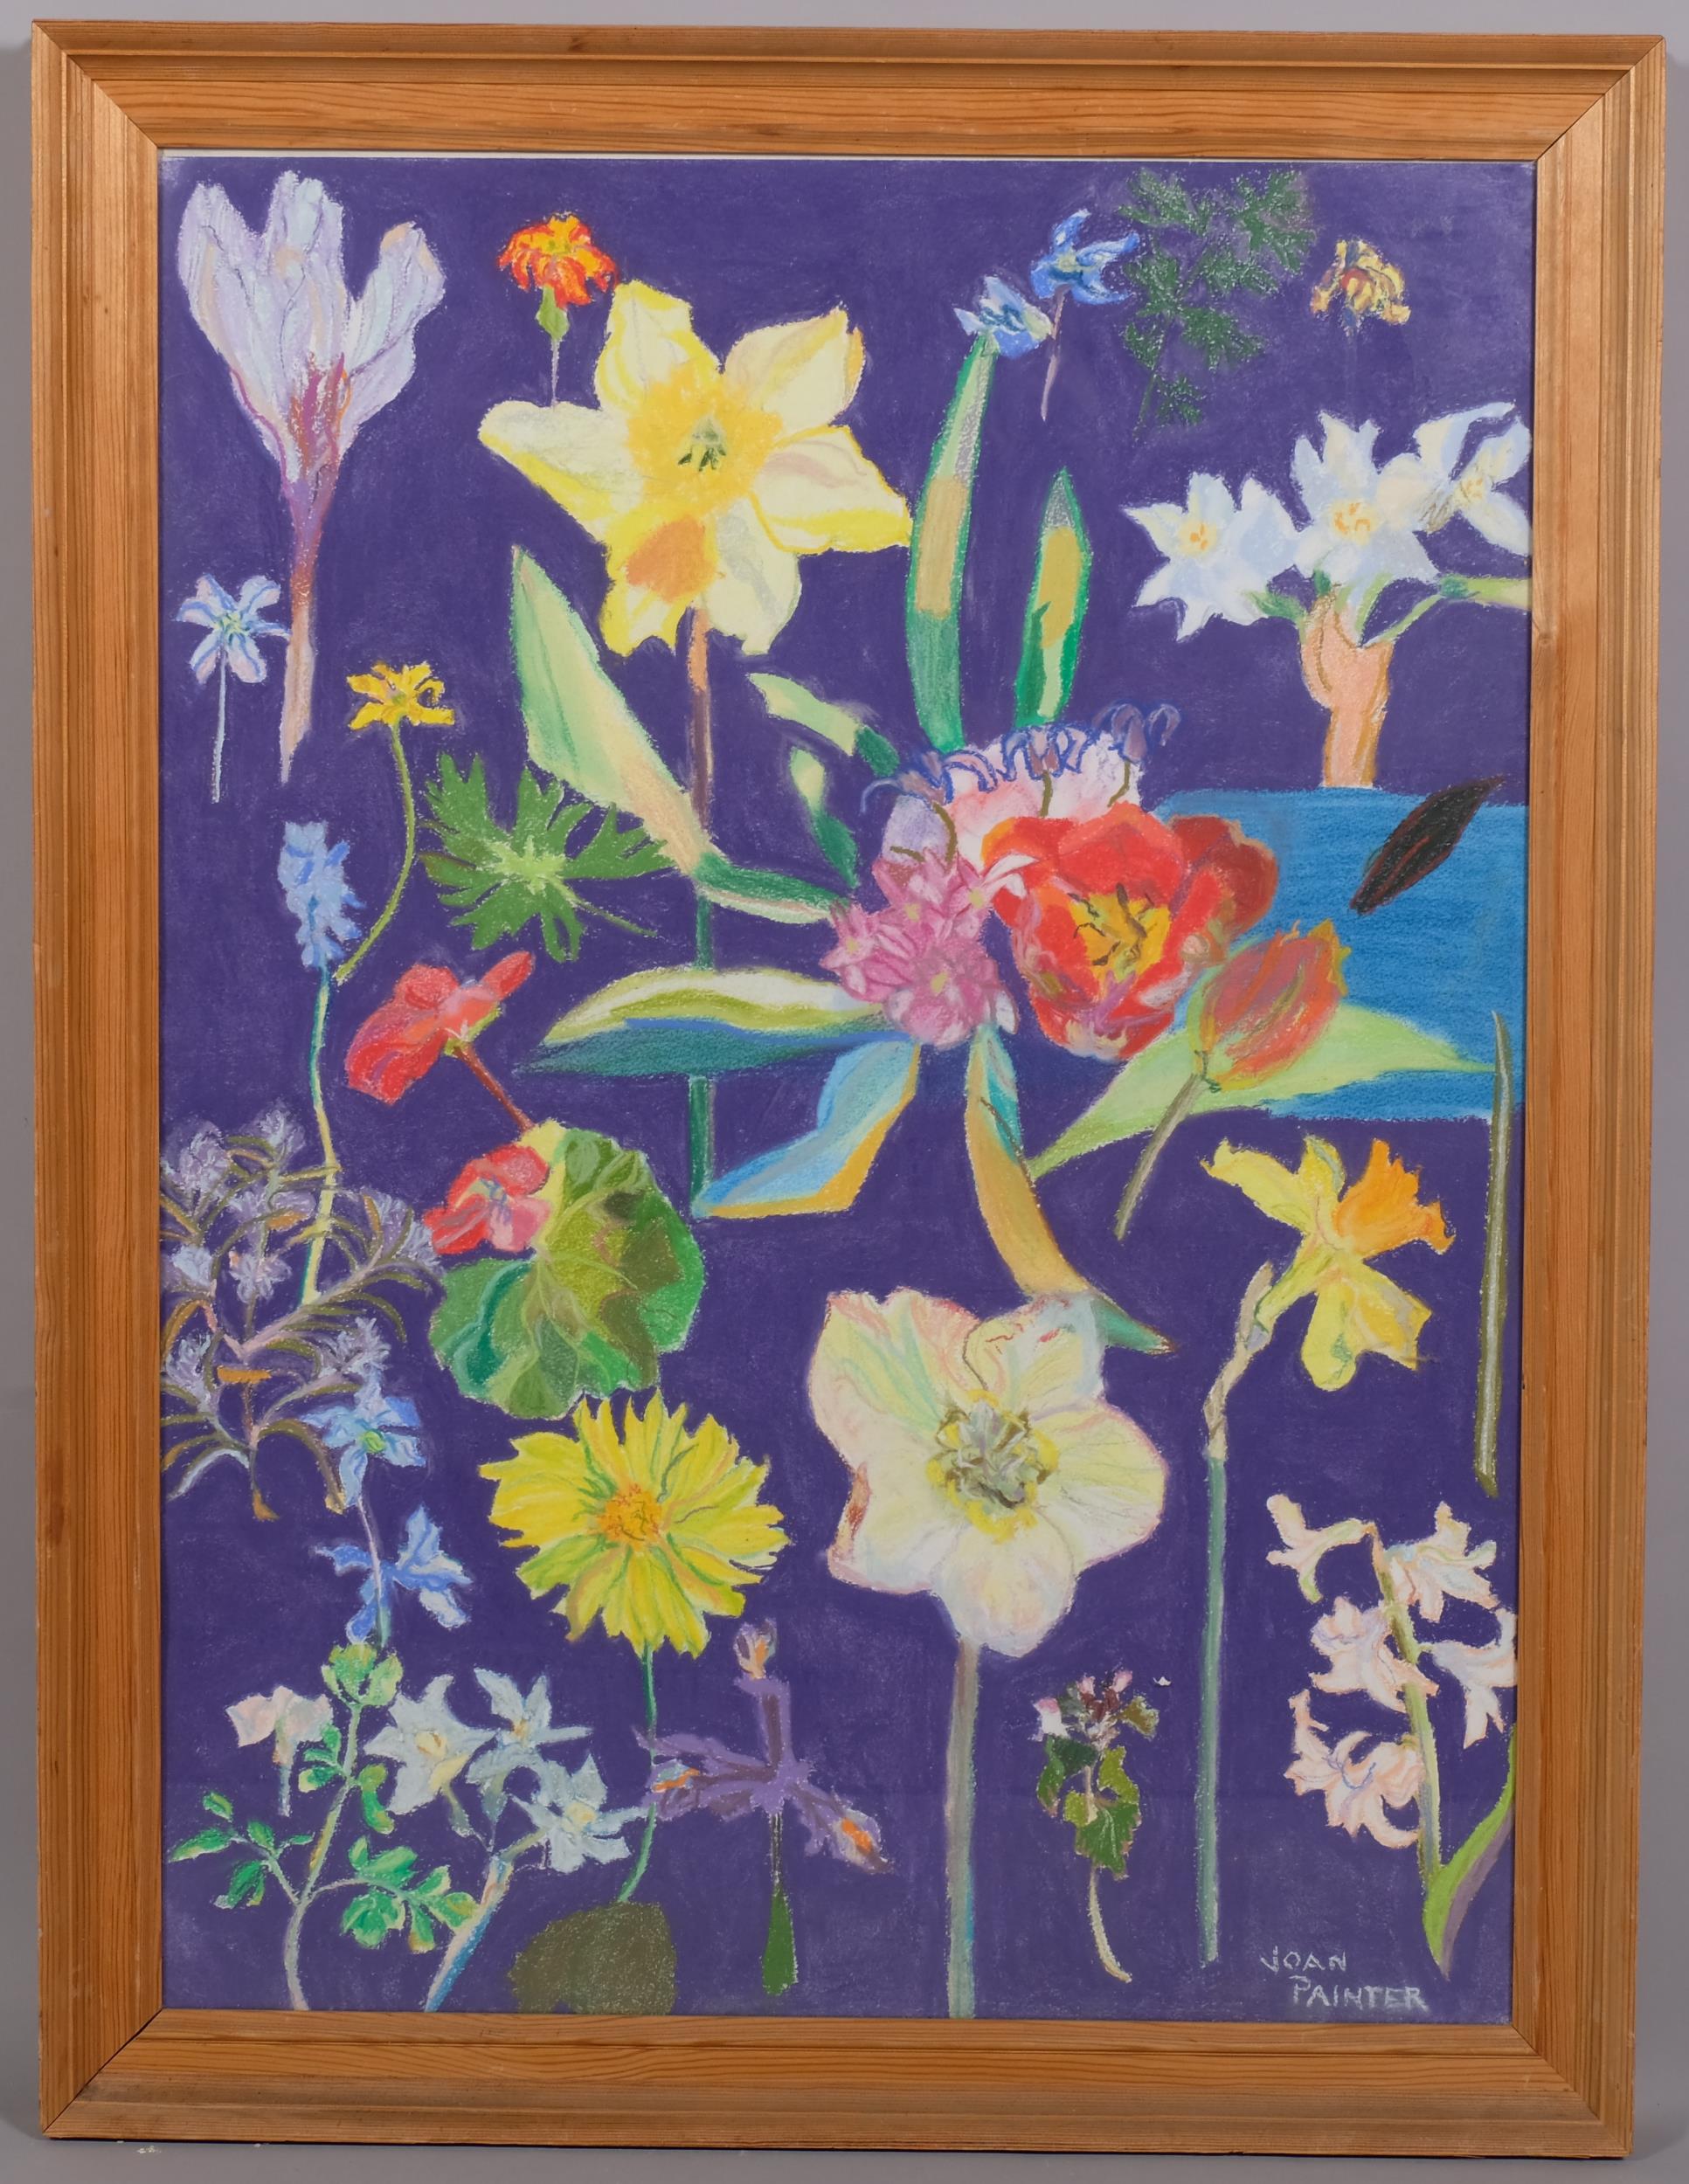 Joan Painter, abstract flowers, mid-20th century gouache/oil on paper, signed, 75cm x 55cm, framed